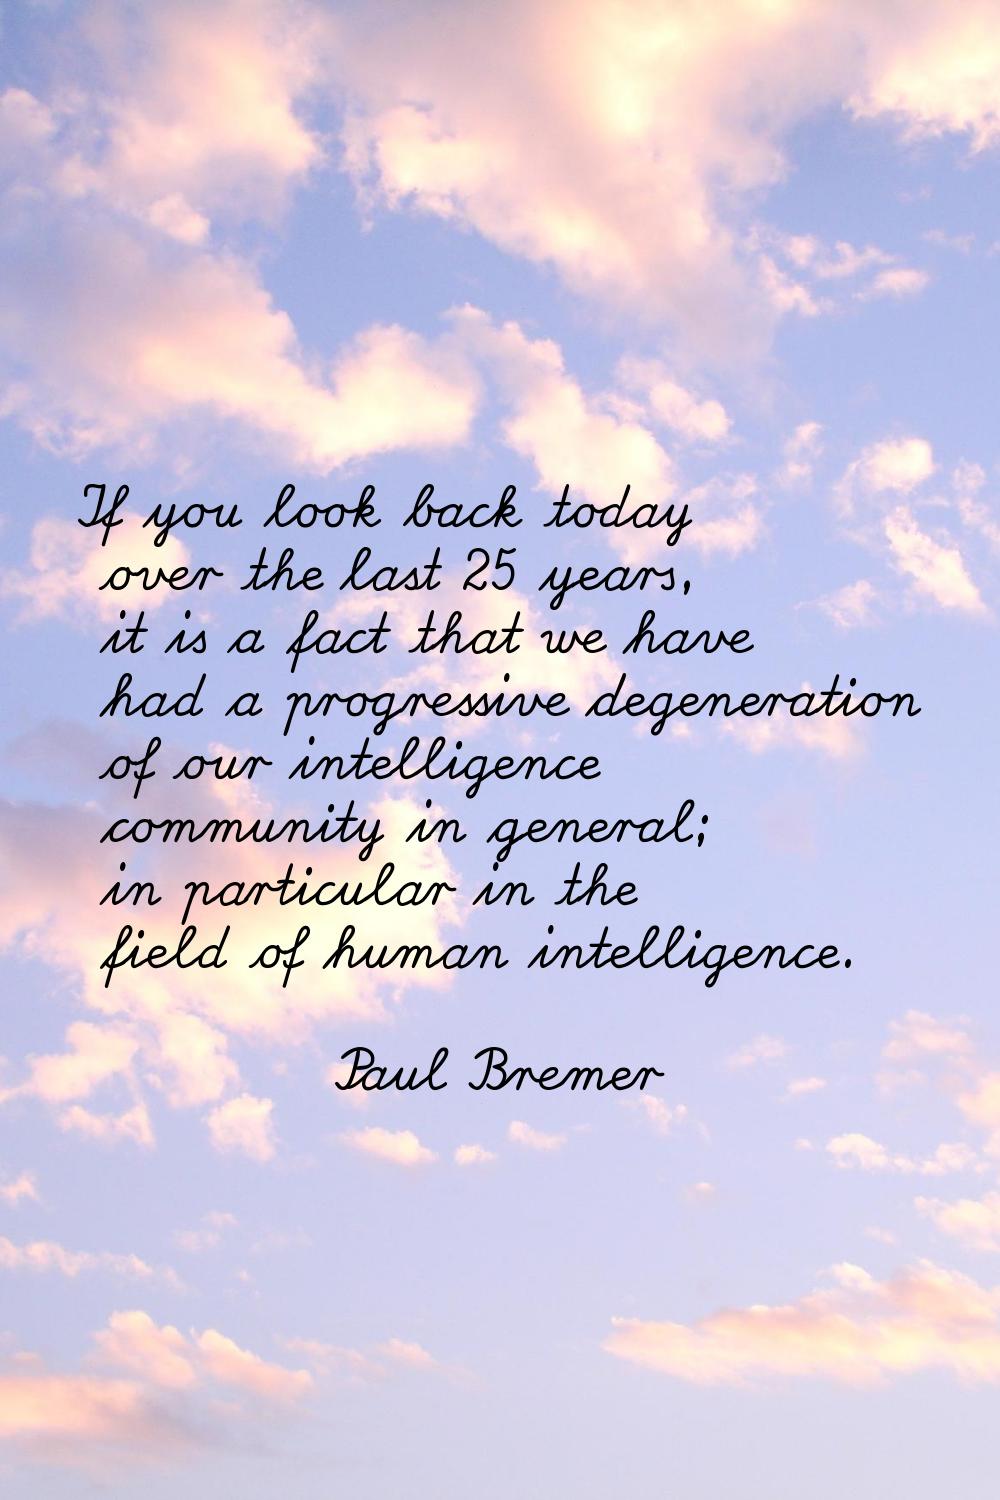 If you look back today over the last 25 years, it is a fact that we have had a progressive degenera